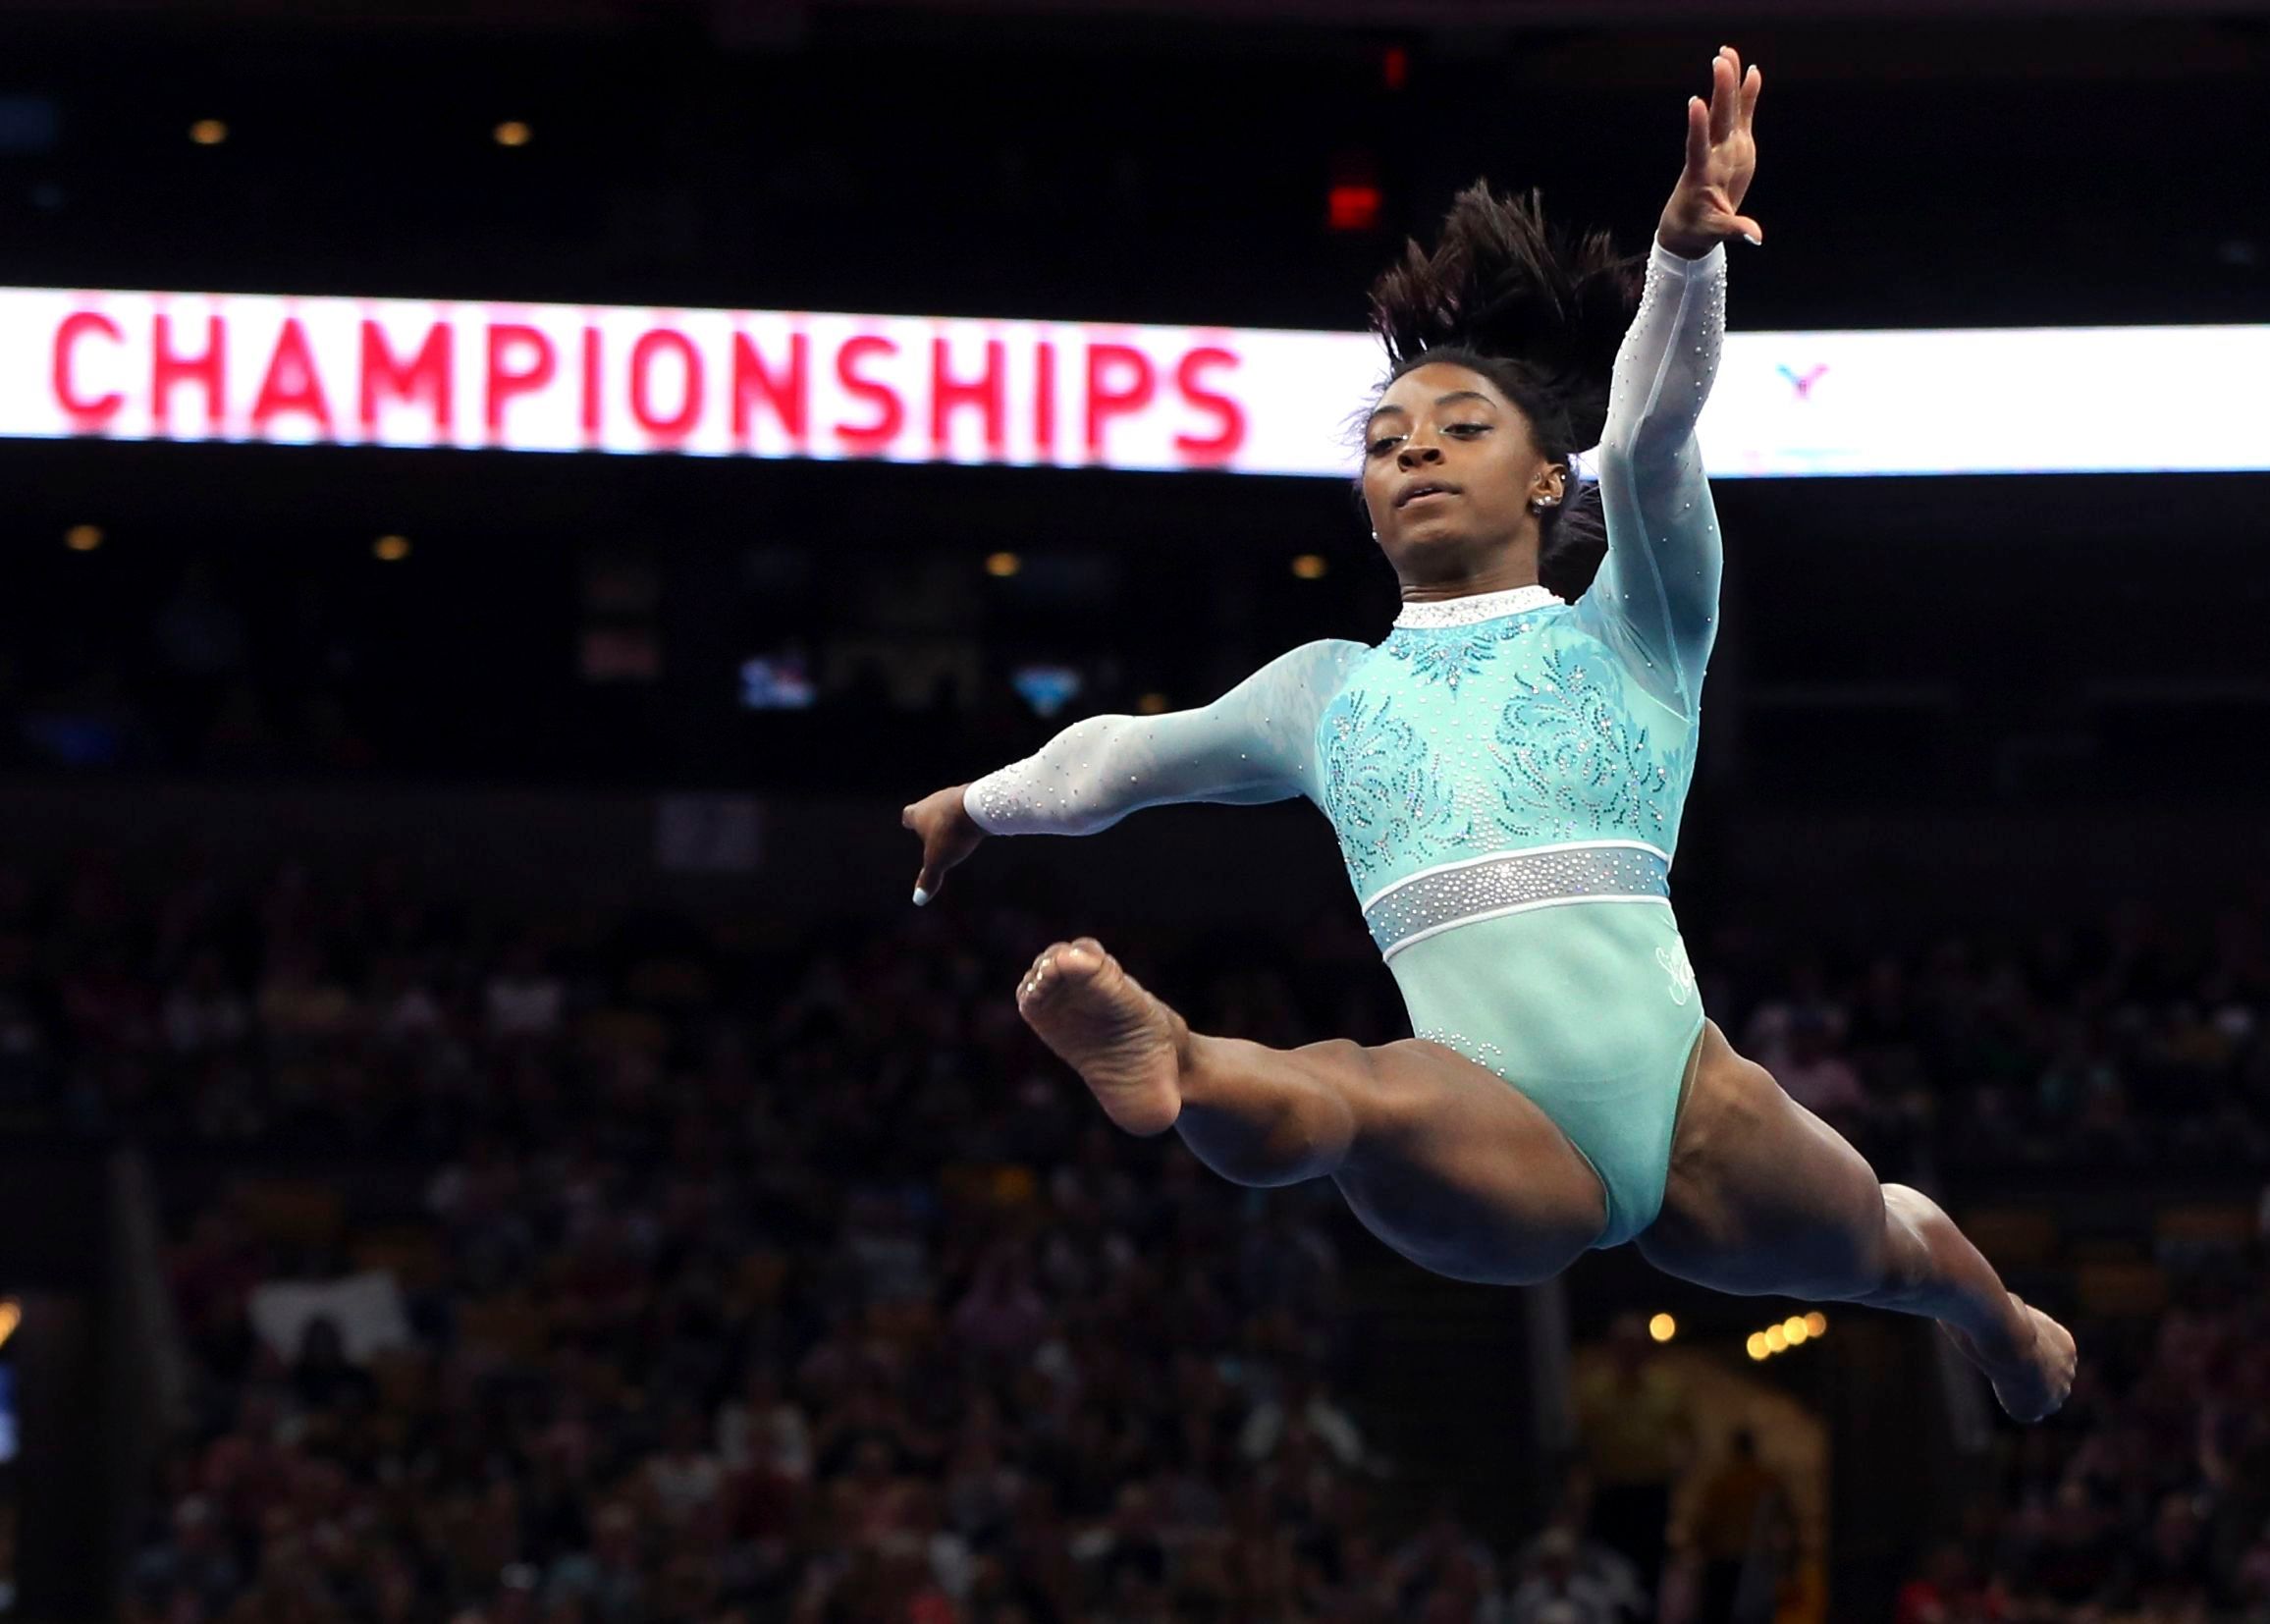 Mandatory Credit: Photo by Elise Amendola/AP/REX/Shutterstock (9794399g)
                      Simone Biles competes on the floor exercise at the U.S. Gymnastics Championships, in Boston
                      US Championships Gymnastics, Boston, USA - 19 Aug 2018 (Elise Amendola/AP/REX/Shutterstock—Elise Amendola/AP/REX/Shutterstock)